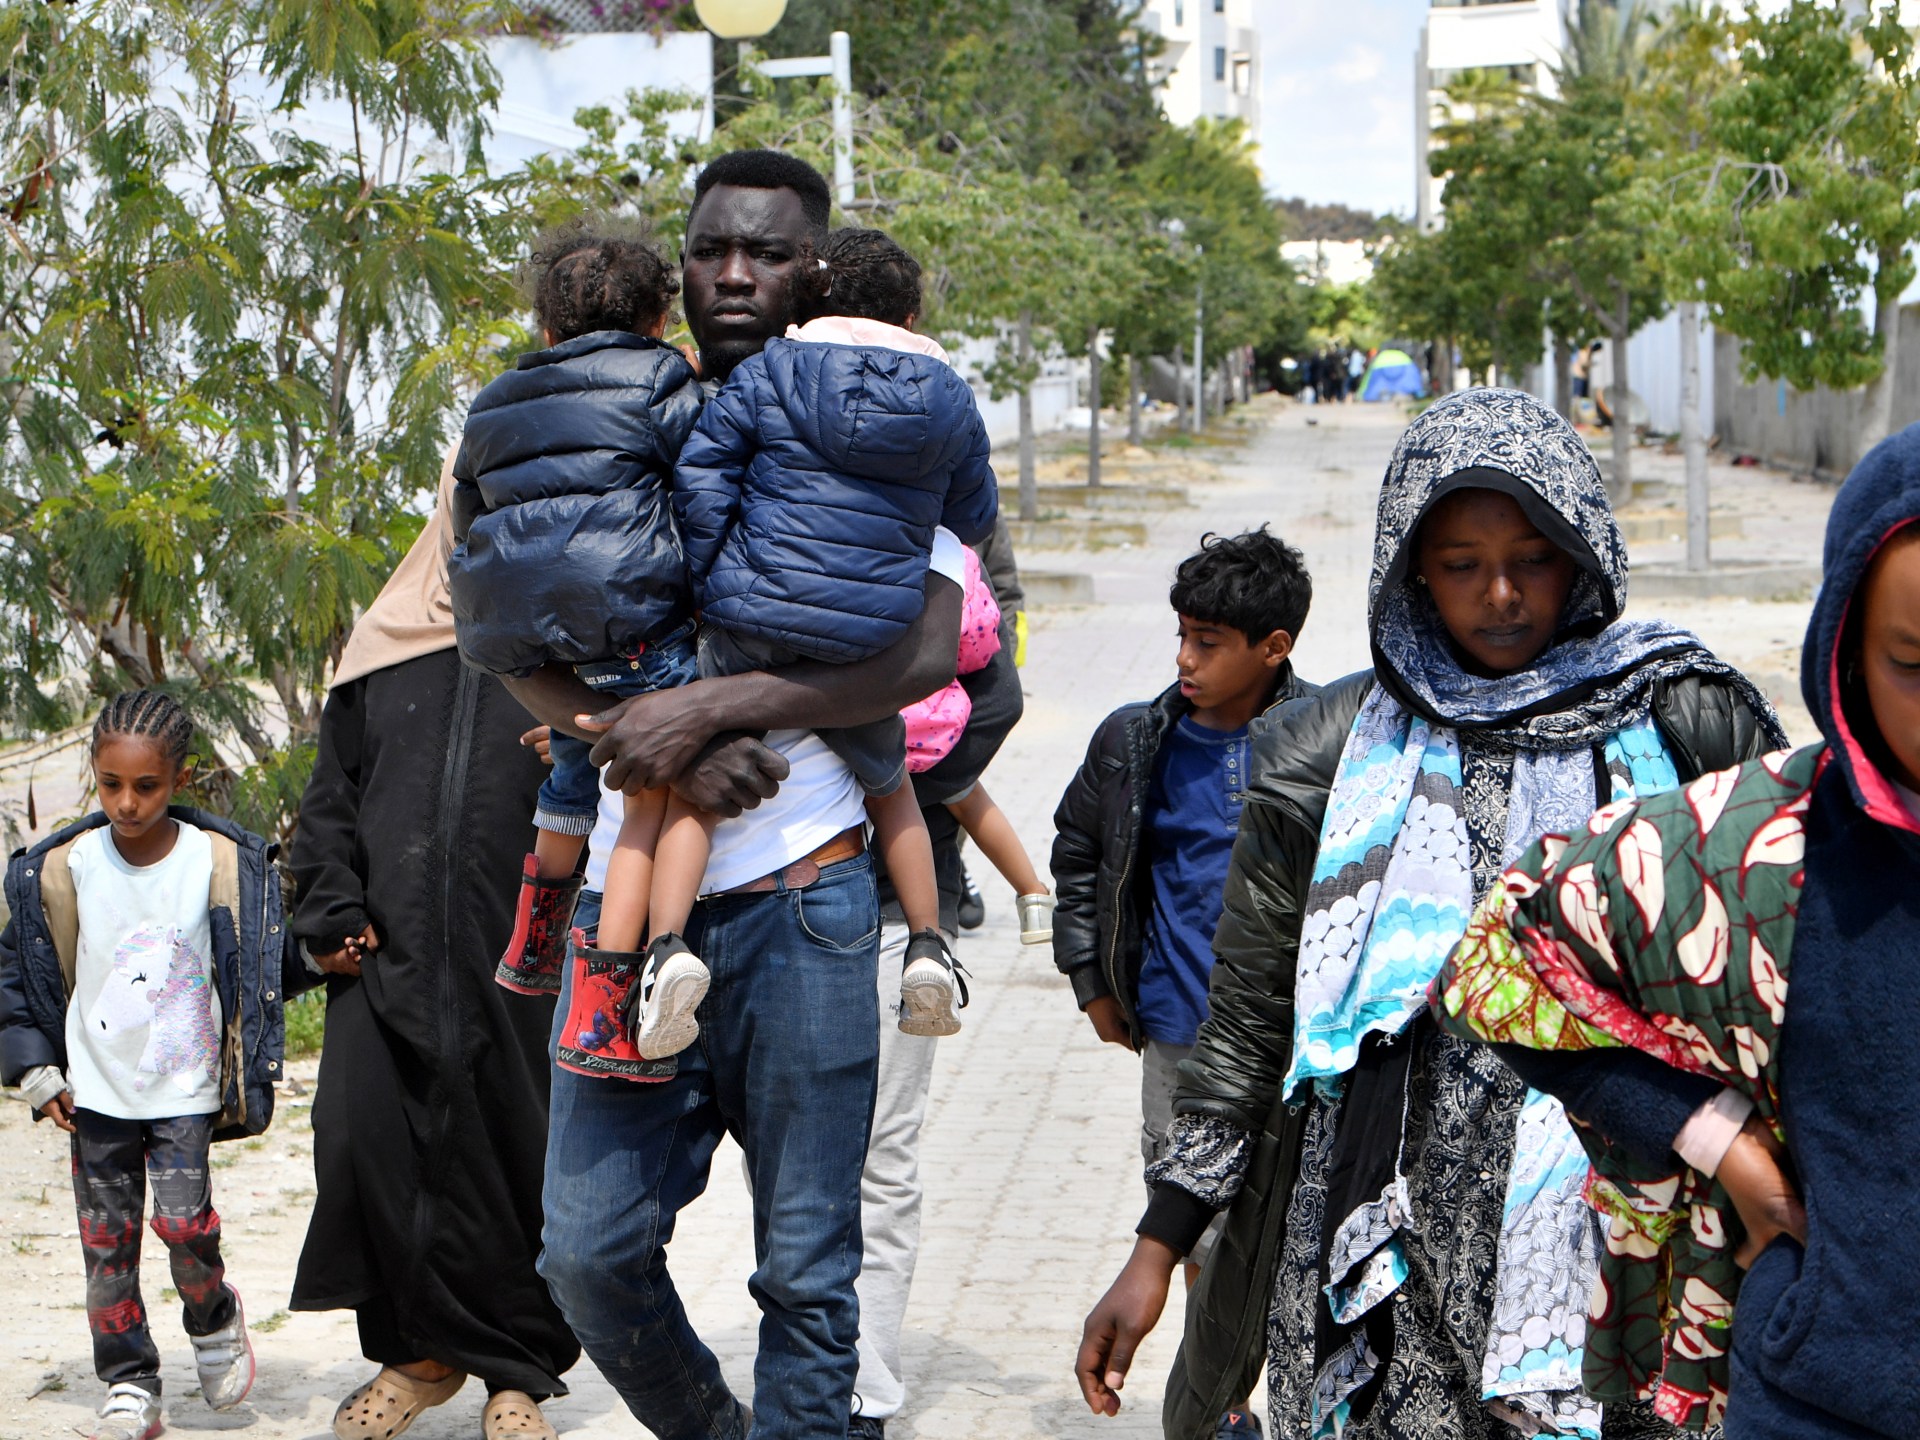 Why is Tunisia expelling Black refugees?